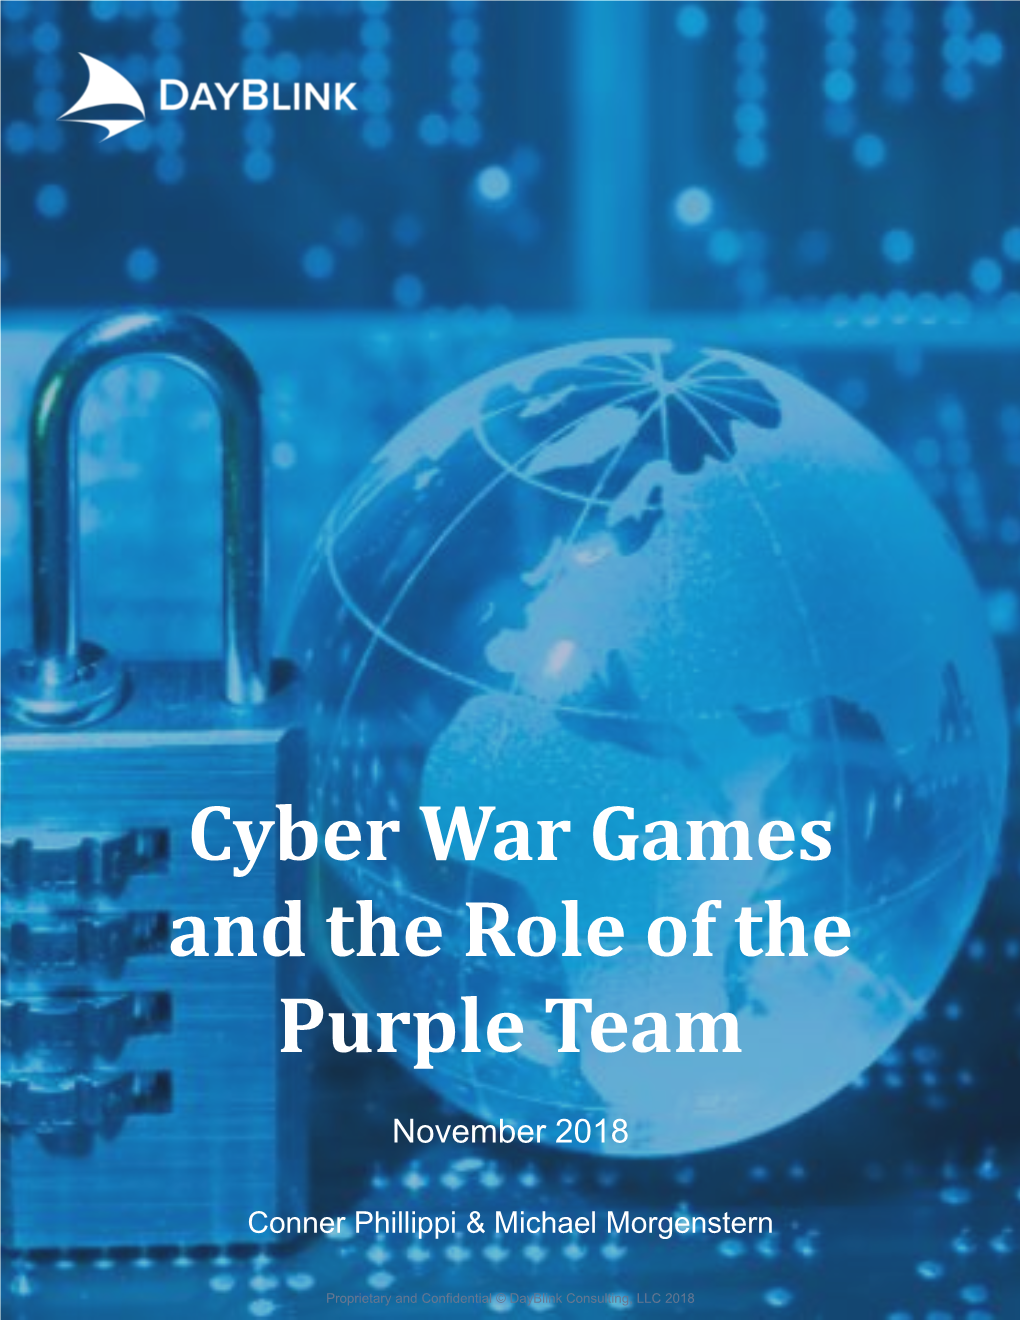 Cyber War Games and the Role of the Purple Team